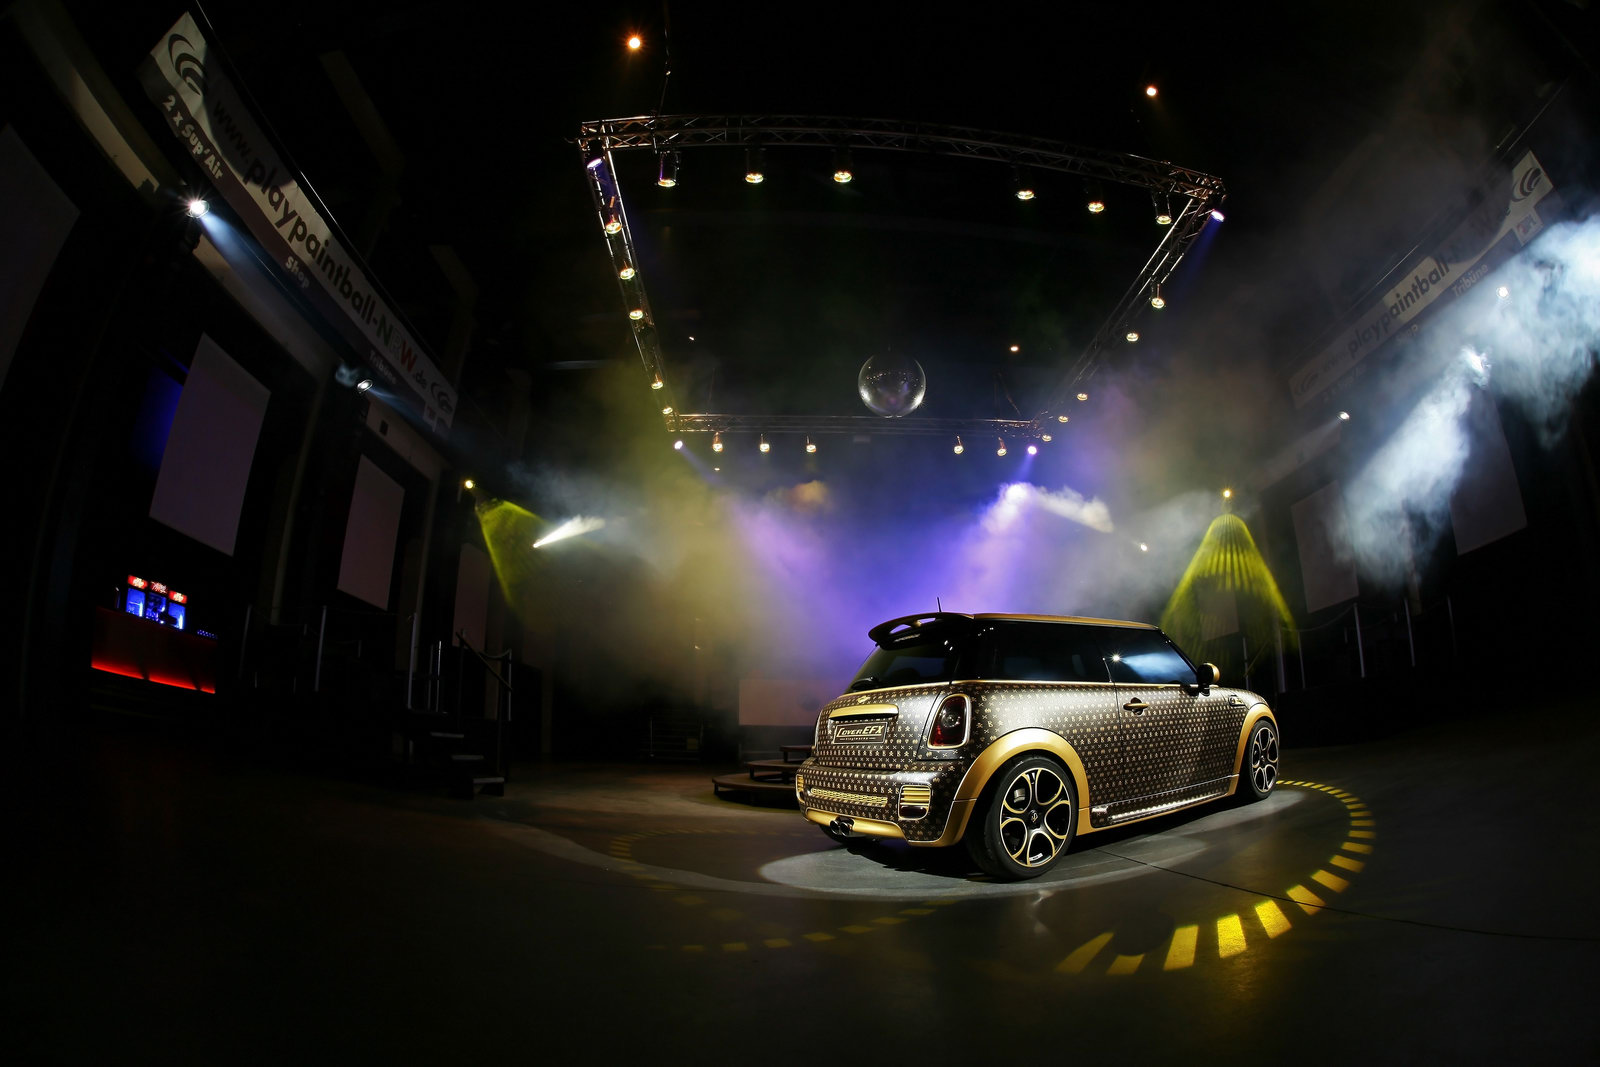 German Tuner Thinks Louis Vuitton-esque MINI JCW with up to 252HP Looks  Kewl